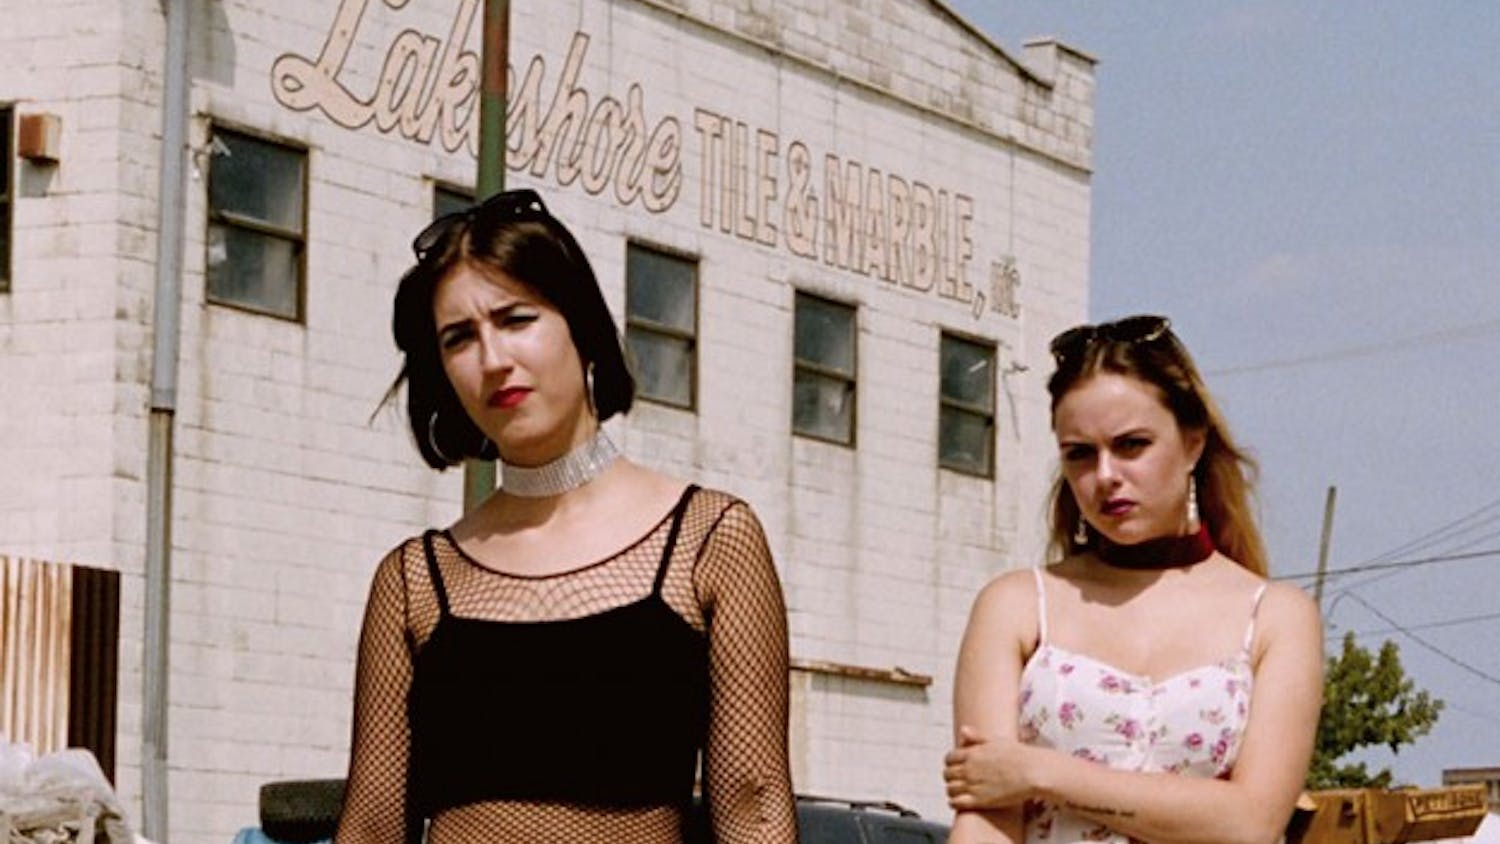 All-girl rock band Her Again, comprising Claudia Ferme, Jordan Gomes-Kushner and Megan Searl, will perform this weekend at Blockhouse Bar. The performance will be followed by a spring tour.&nbsp;